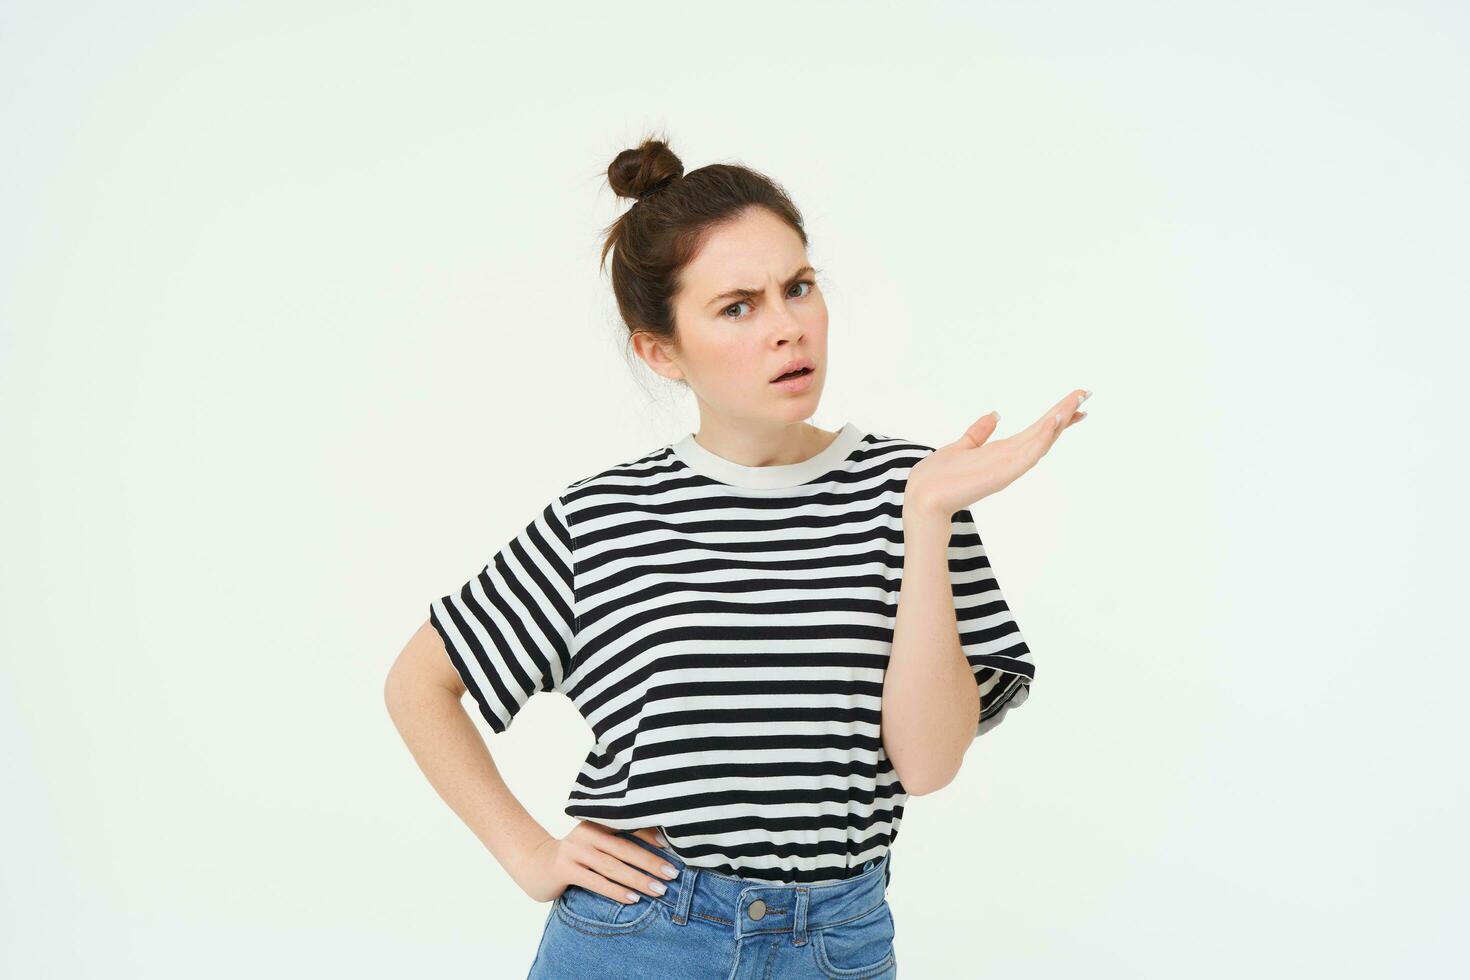 Portrait of angry woman complaining, raising one hand and shrugging looking frustrated, waiting for explanation, doesnt udnerstand smth, standing over white background photo